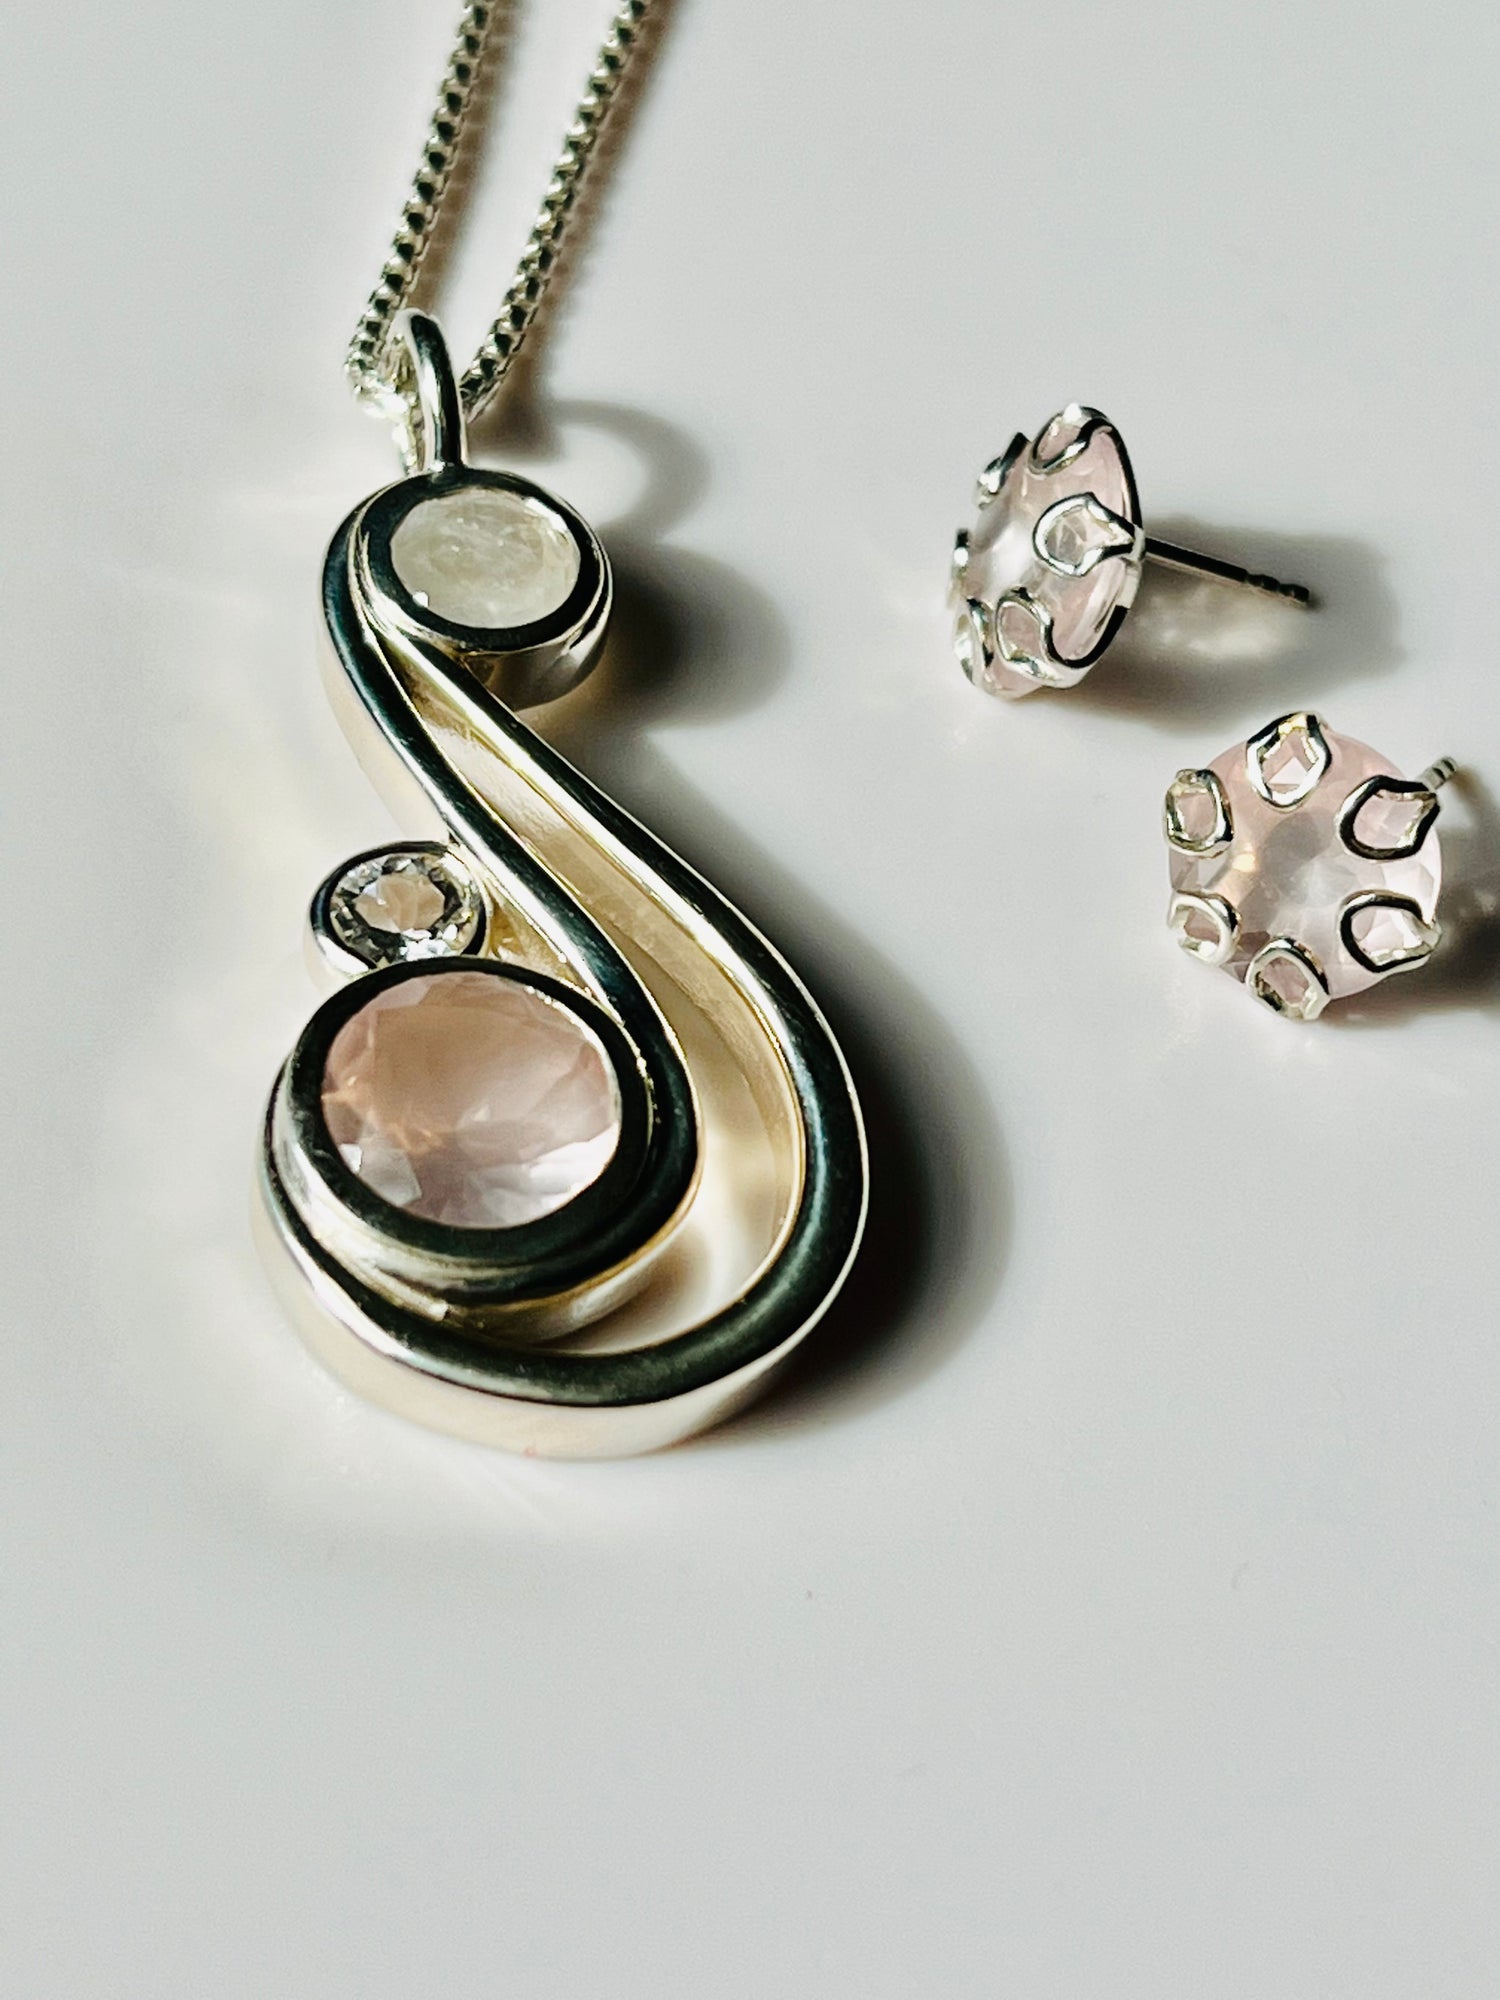 Aria pendant Blush paired with Poppy Earrings in Rose Quartz all by Hannah Daye & Co